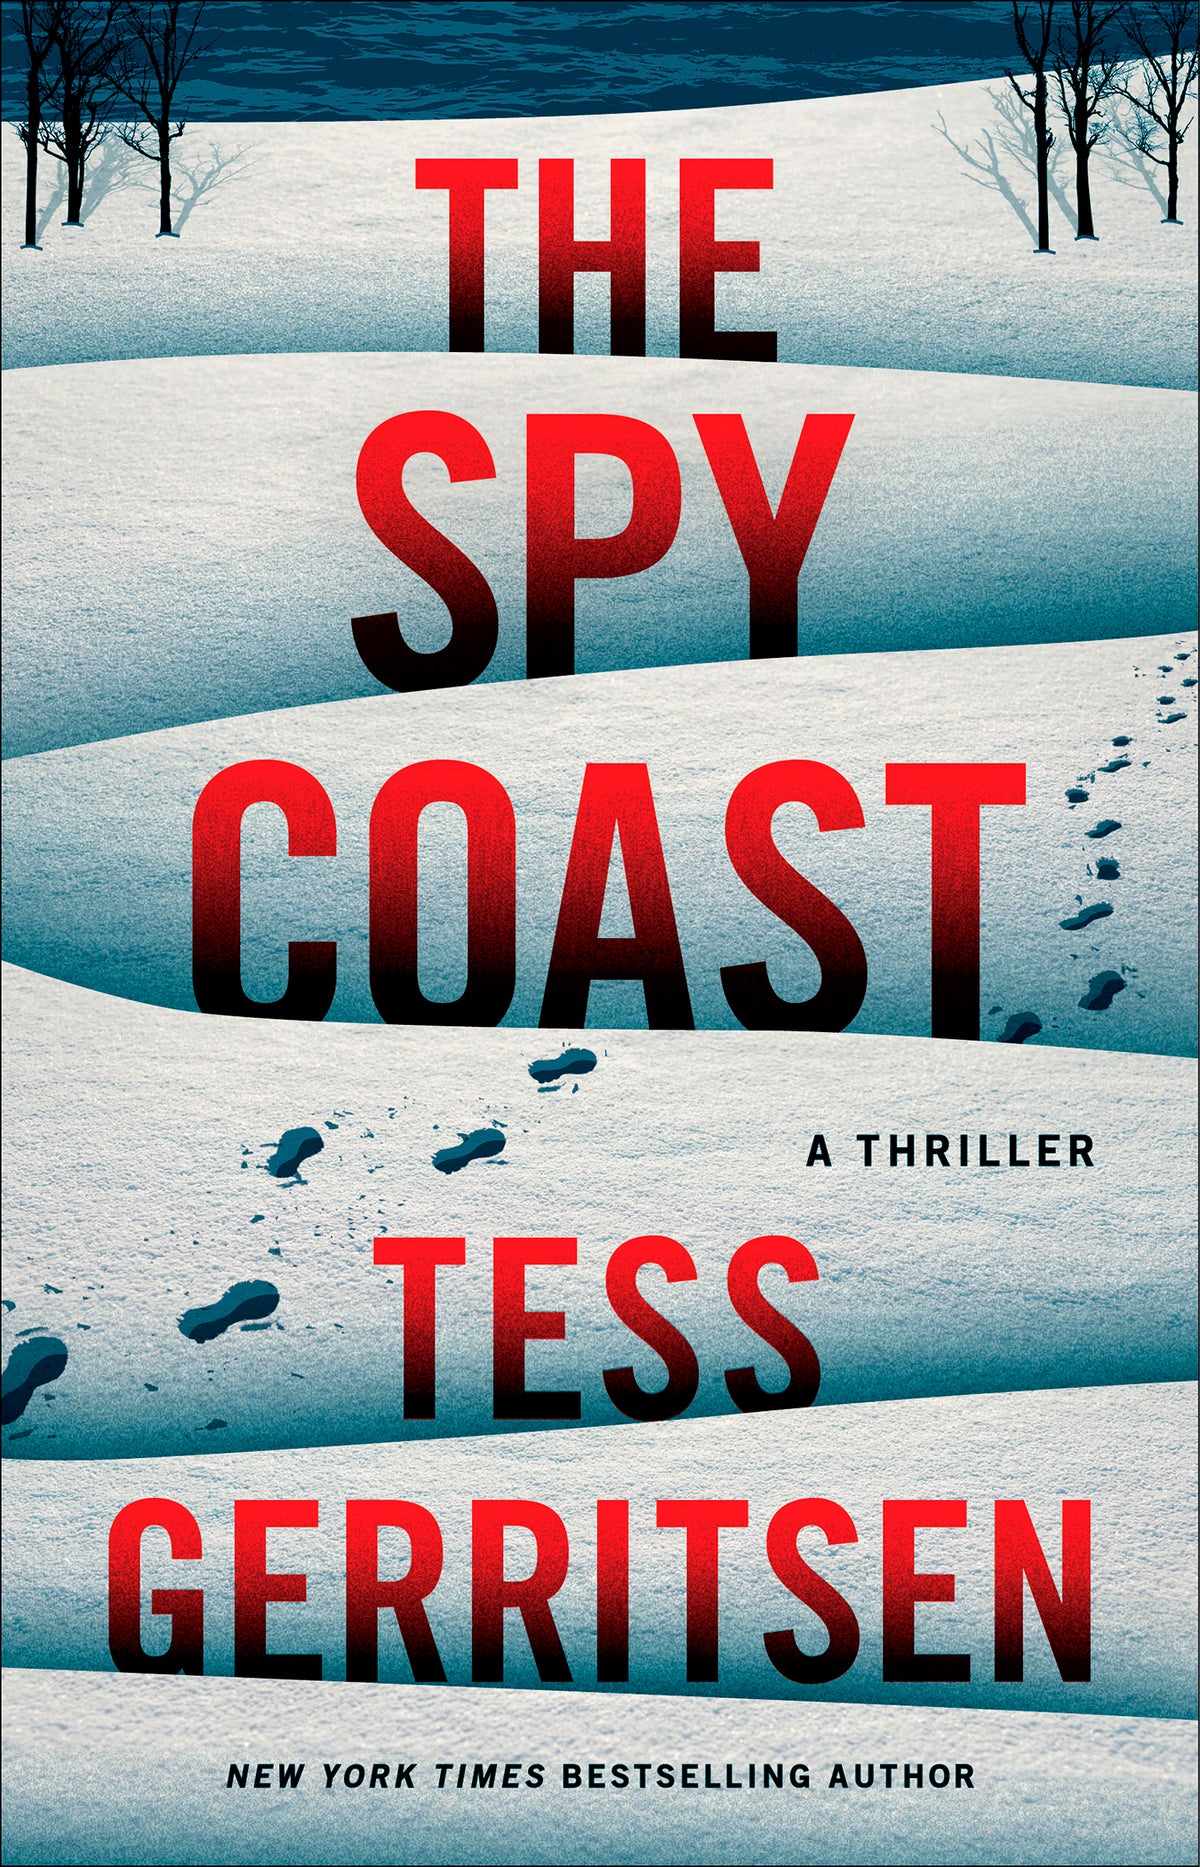 Book Review: Tess Gerritsen writes an un-put-downable spin on espionage novels with 'The Spy Coast'